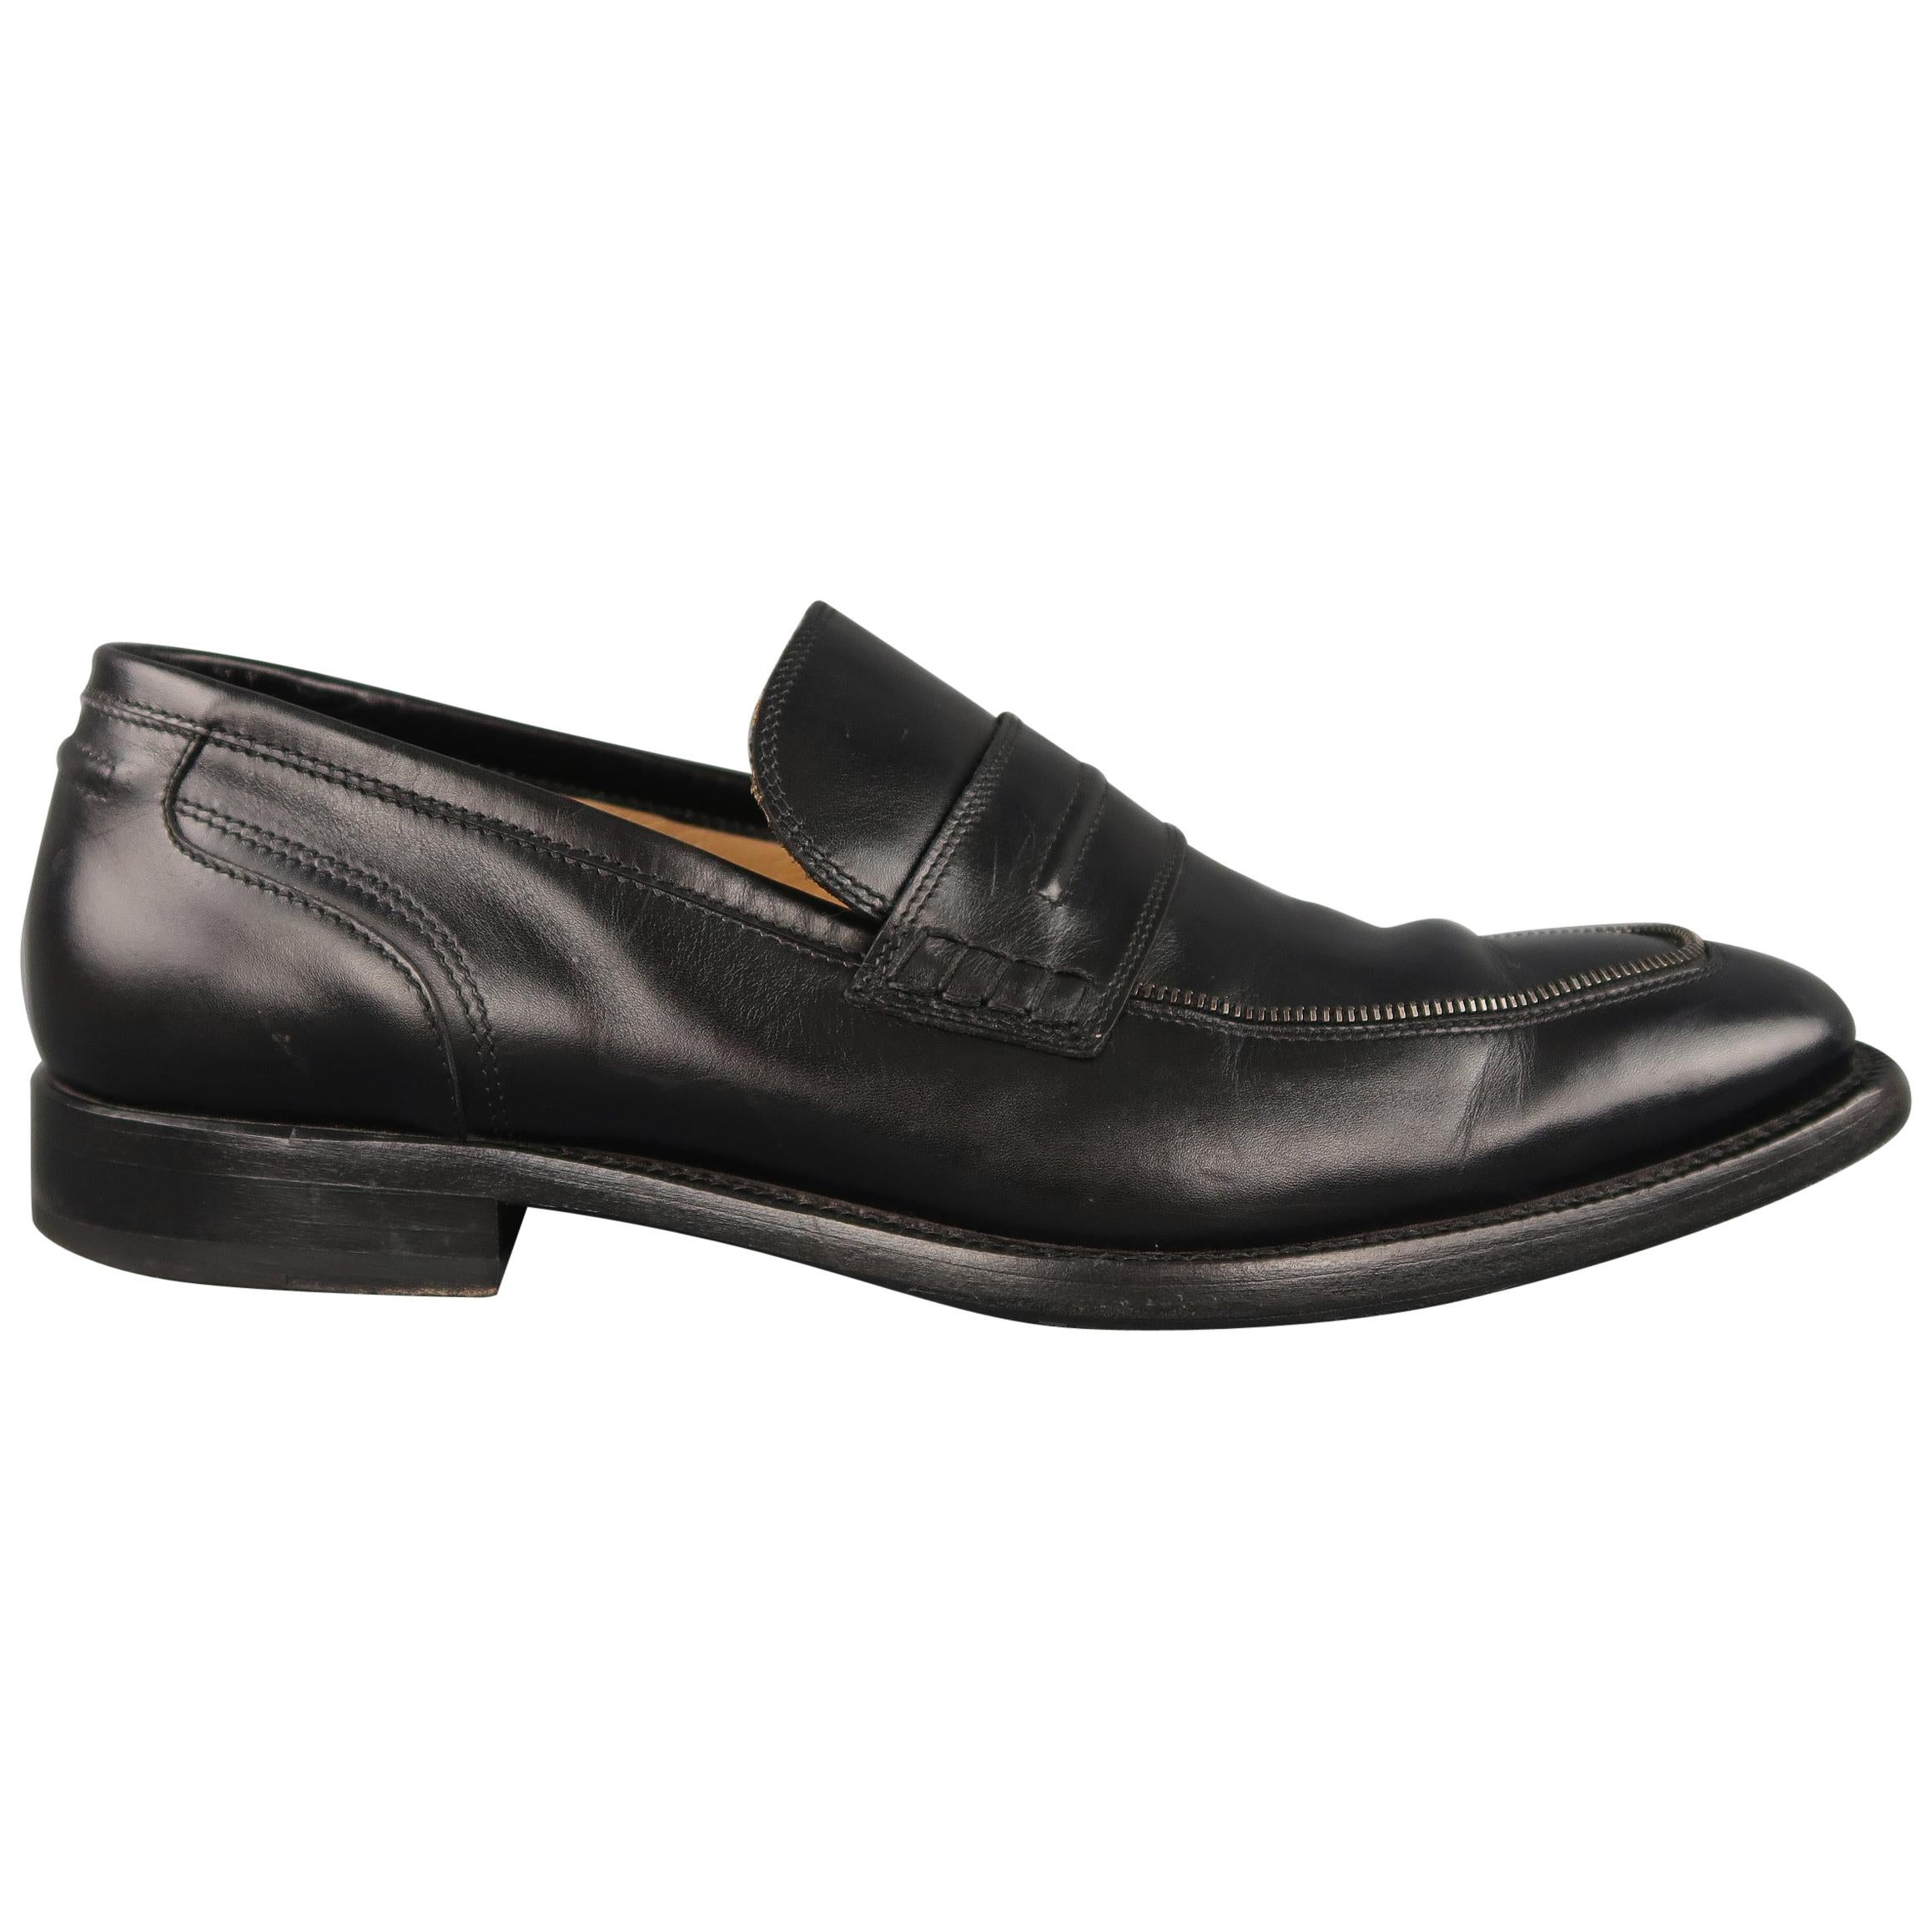 Neil Barrett Loafers - Black Solid Leather Zipper Piping Shoes